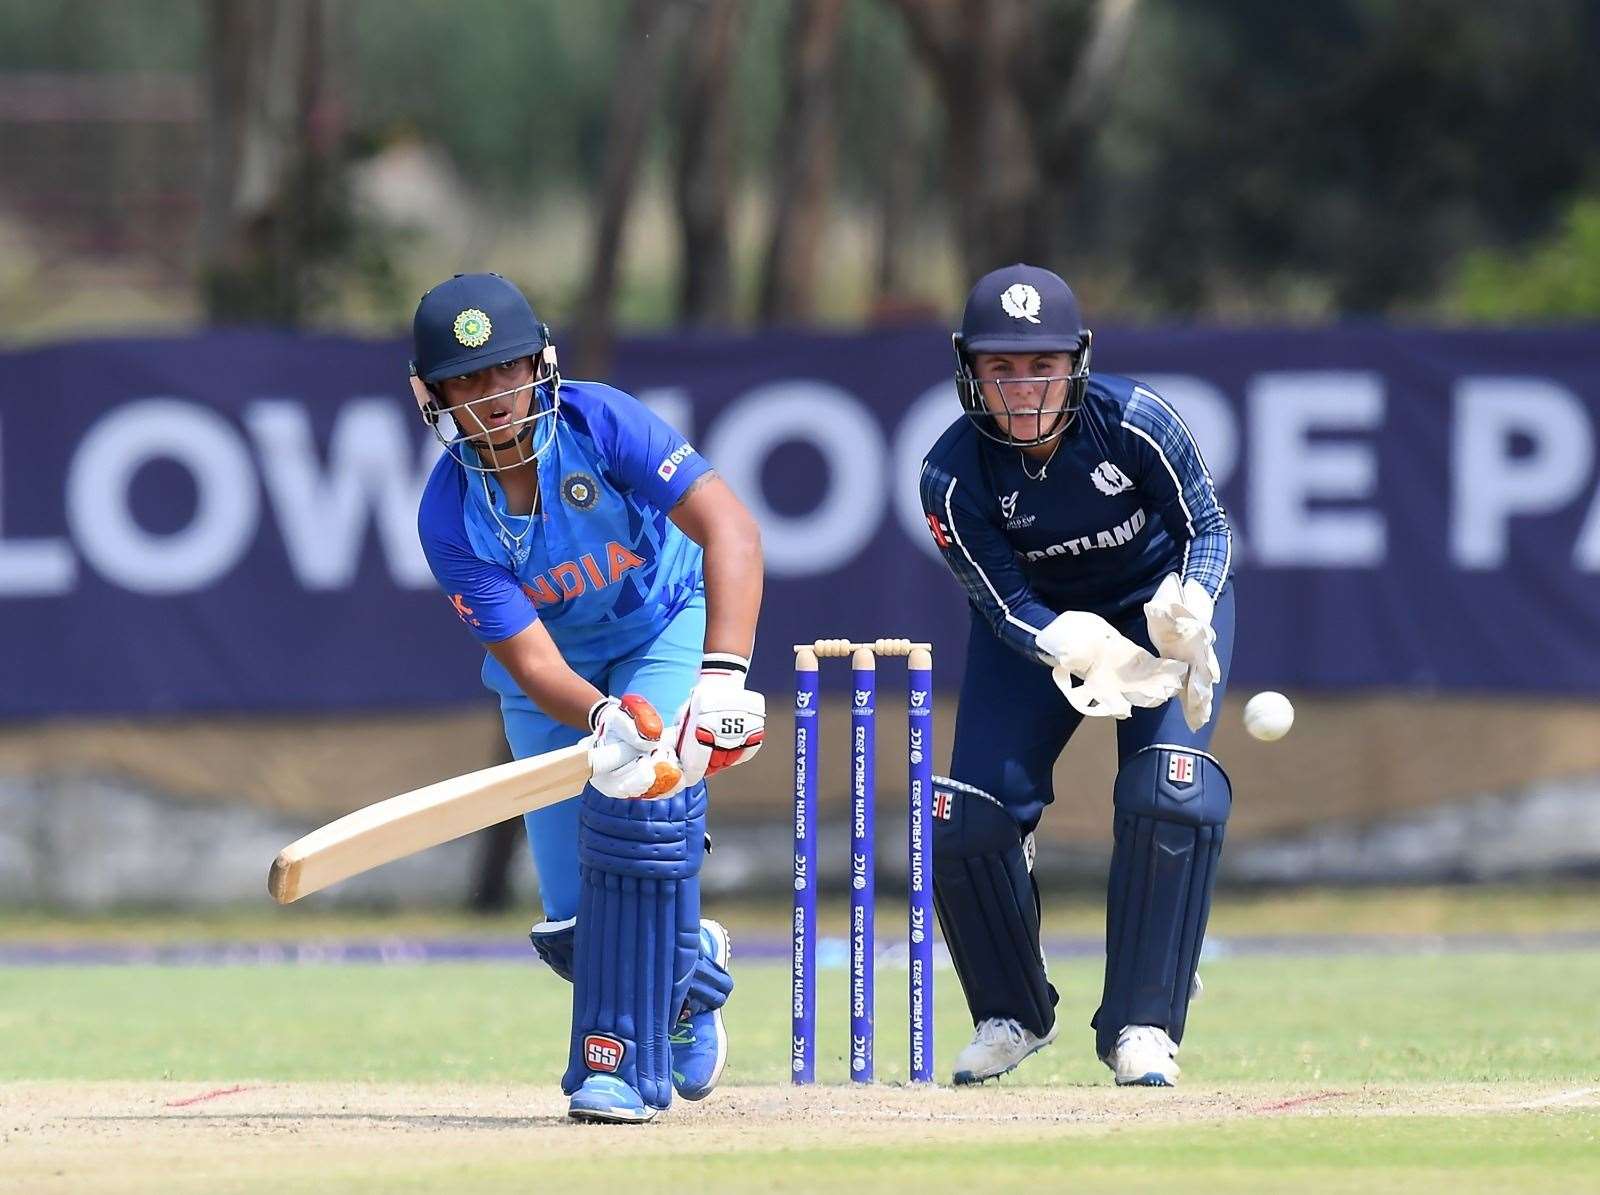 In action in South Africa during the under-19 world cup.